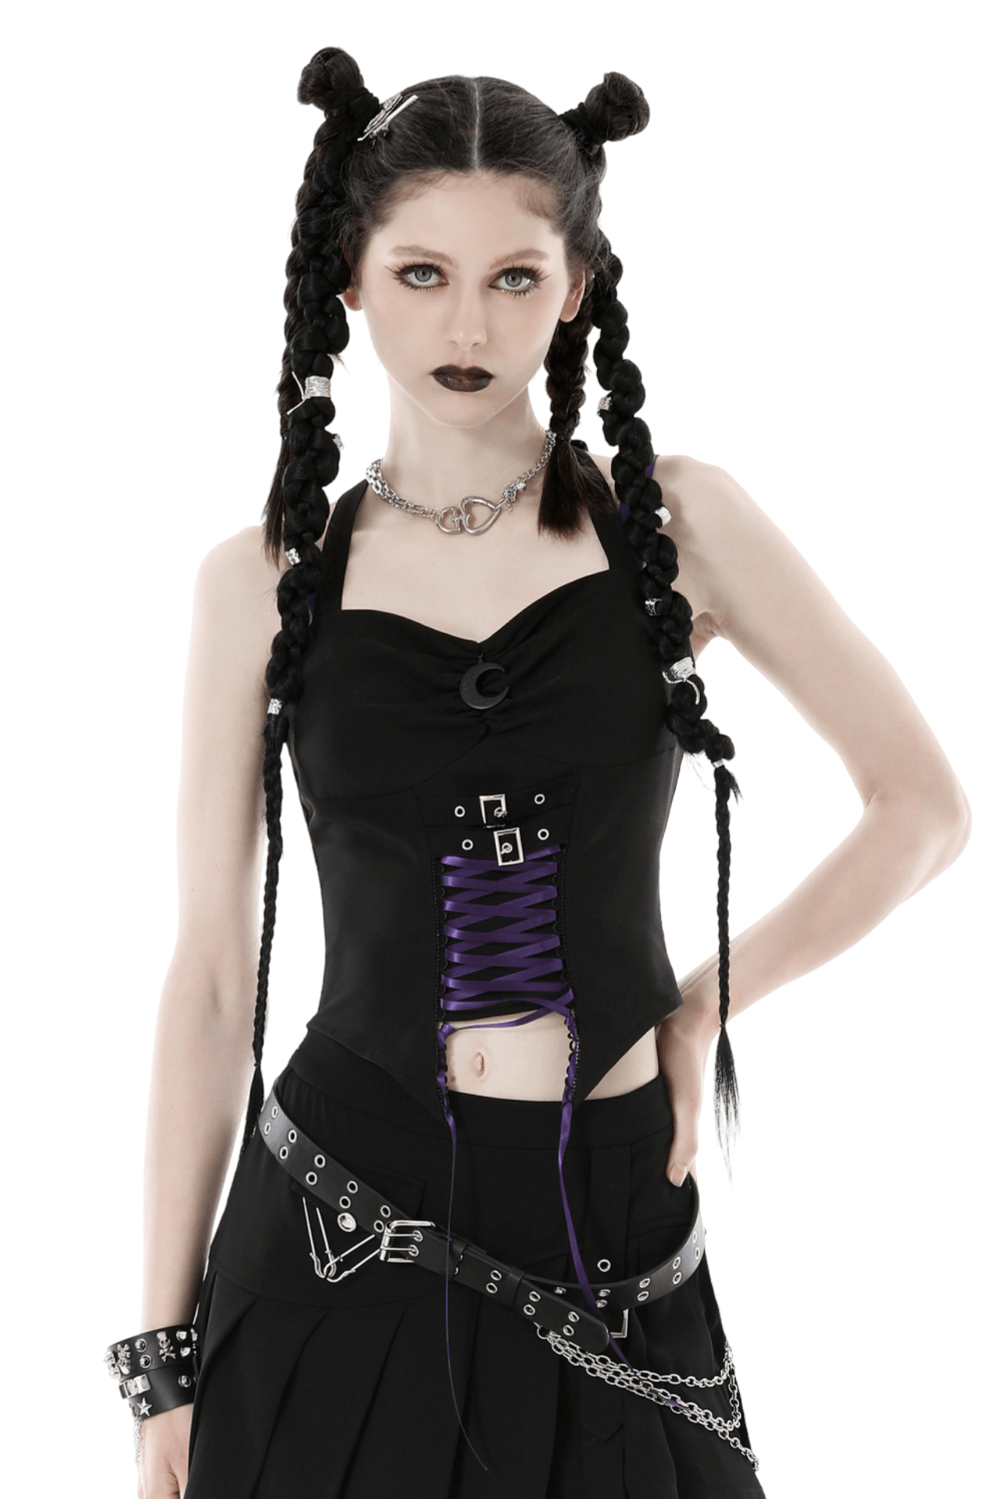 Black Punk Halter Corset with Lace-Up Detailing